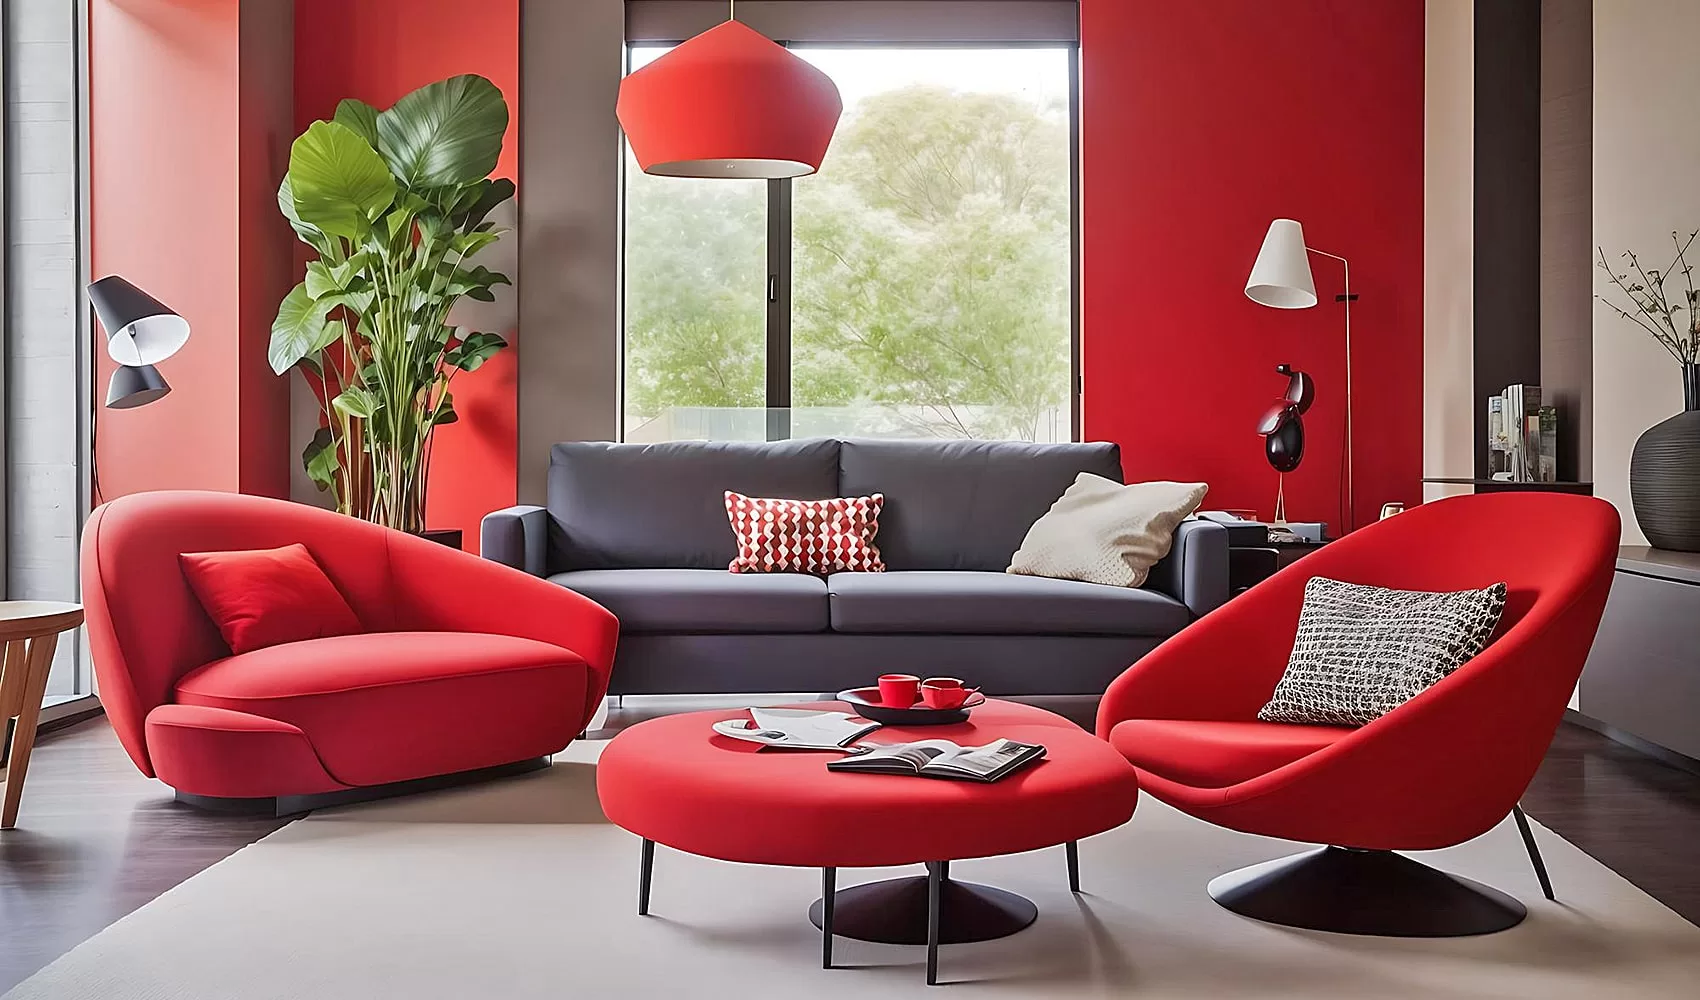 Red Couch Living Room Ideas | Living Room Ideas with Red Couch | Living Room Ideas Red Couch | Living Room with Red Sofa